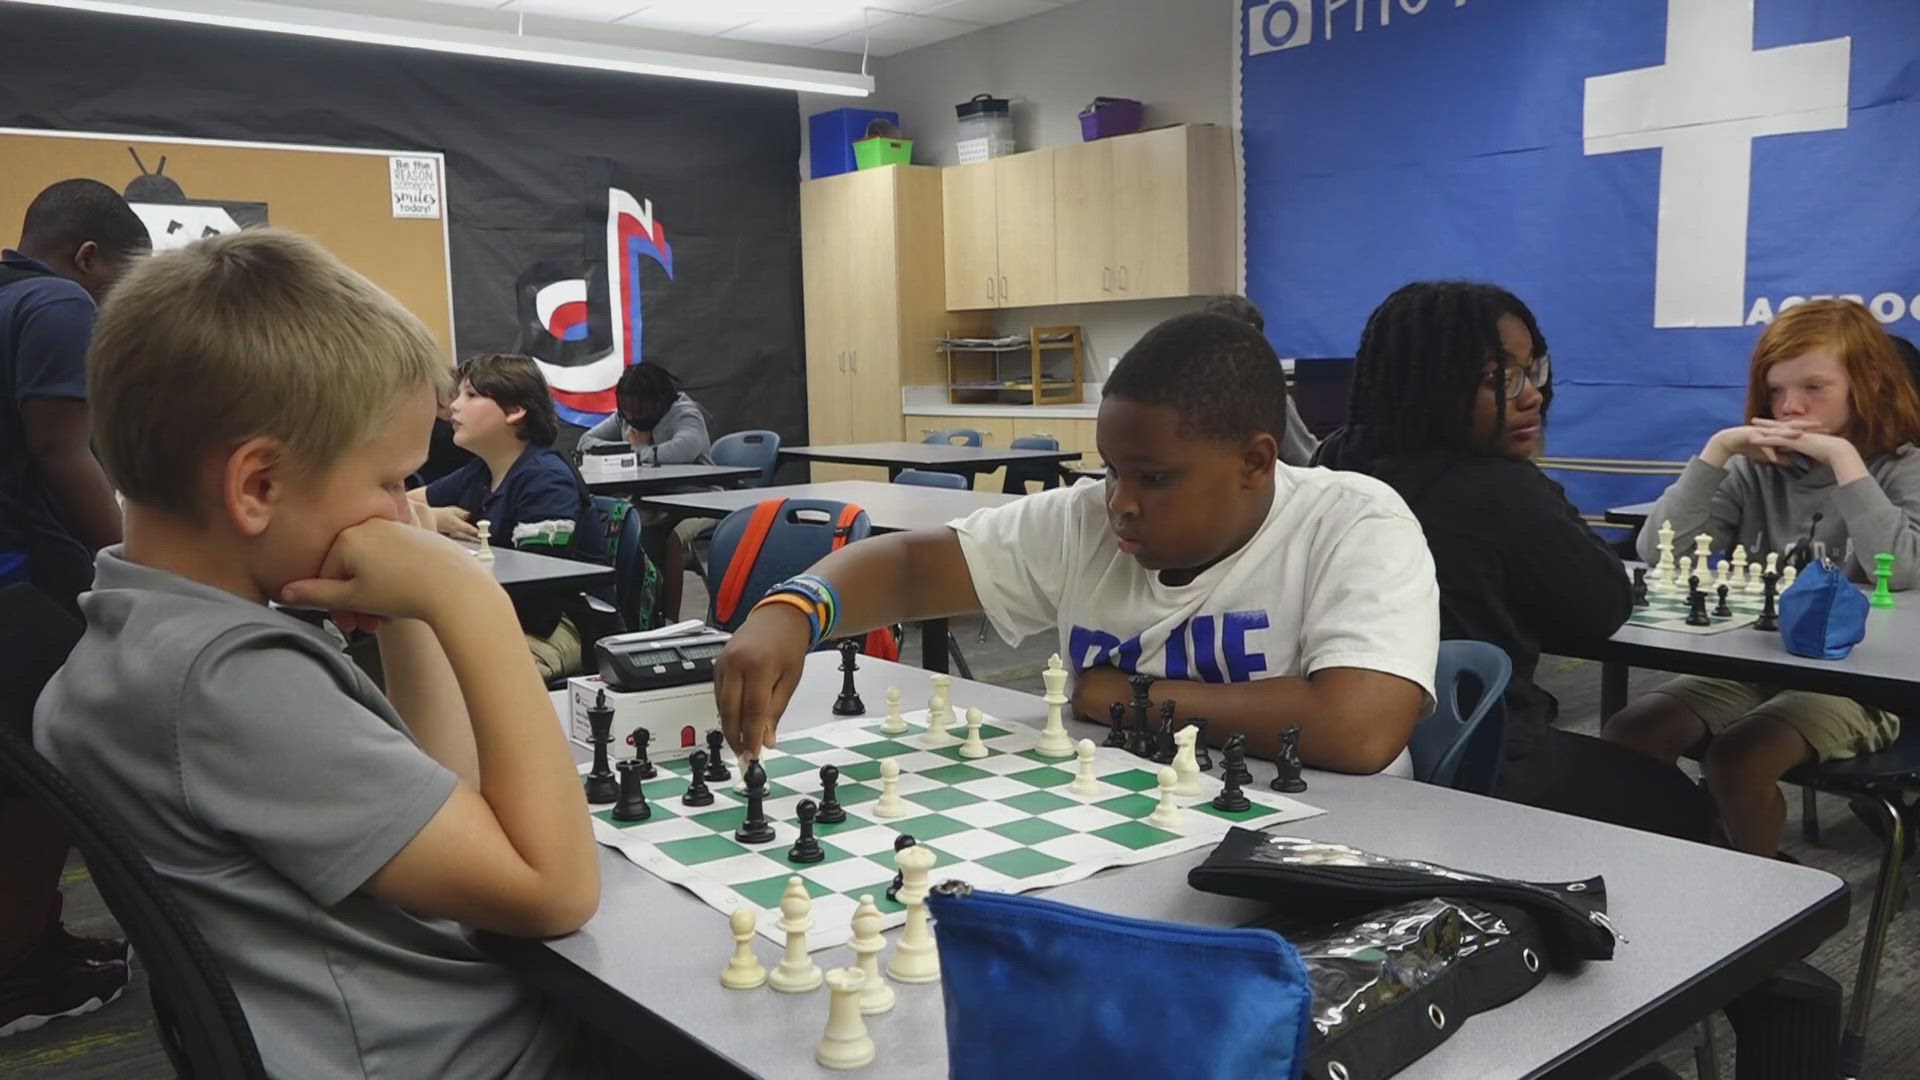 A Little Rock elementary school has implemented chess into its daily curriculum, and it’s paying off with higher test scores and improved classroom behavior.